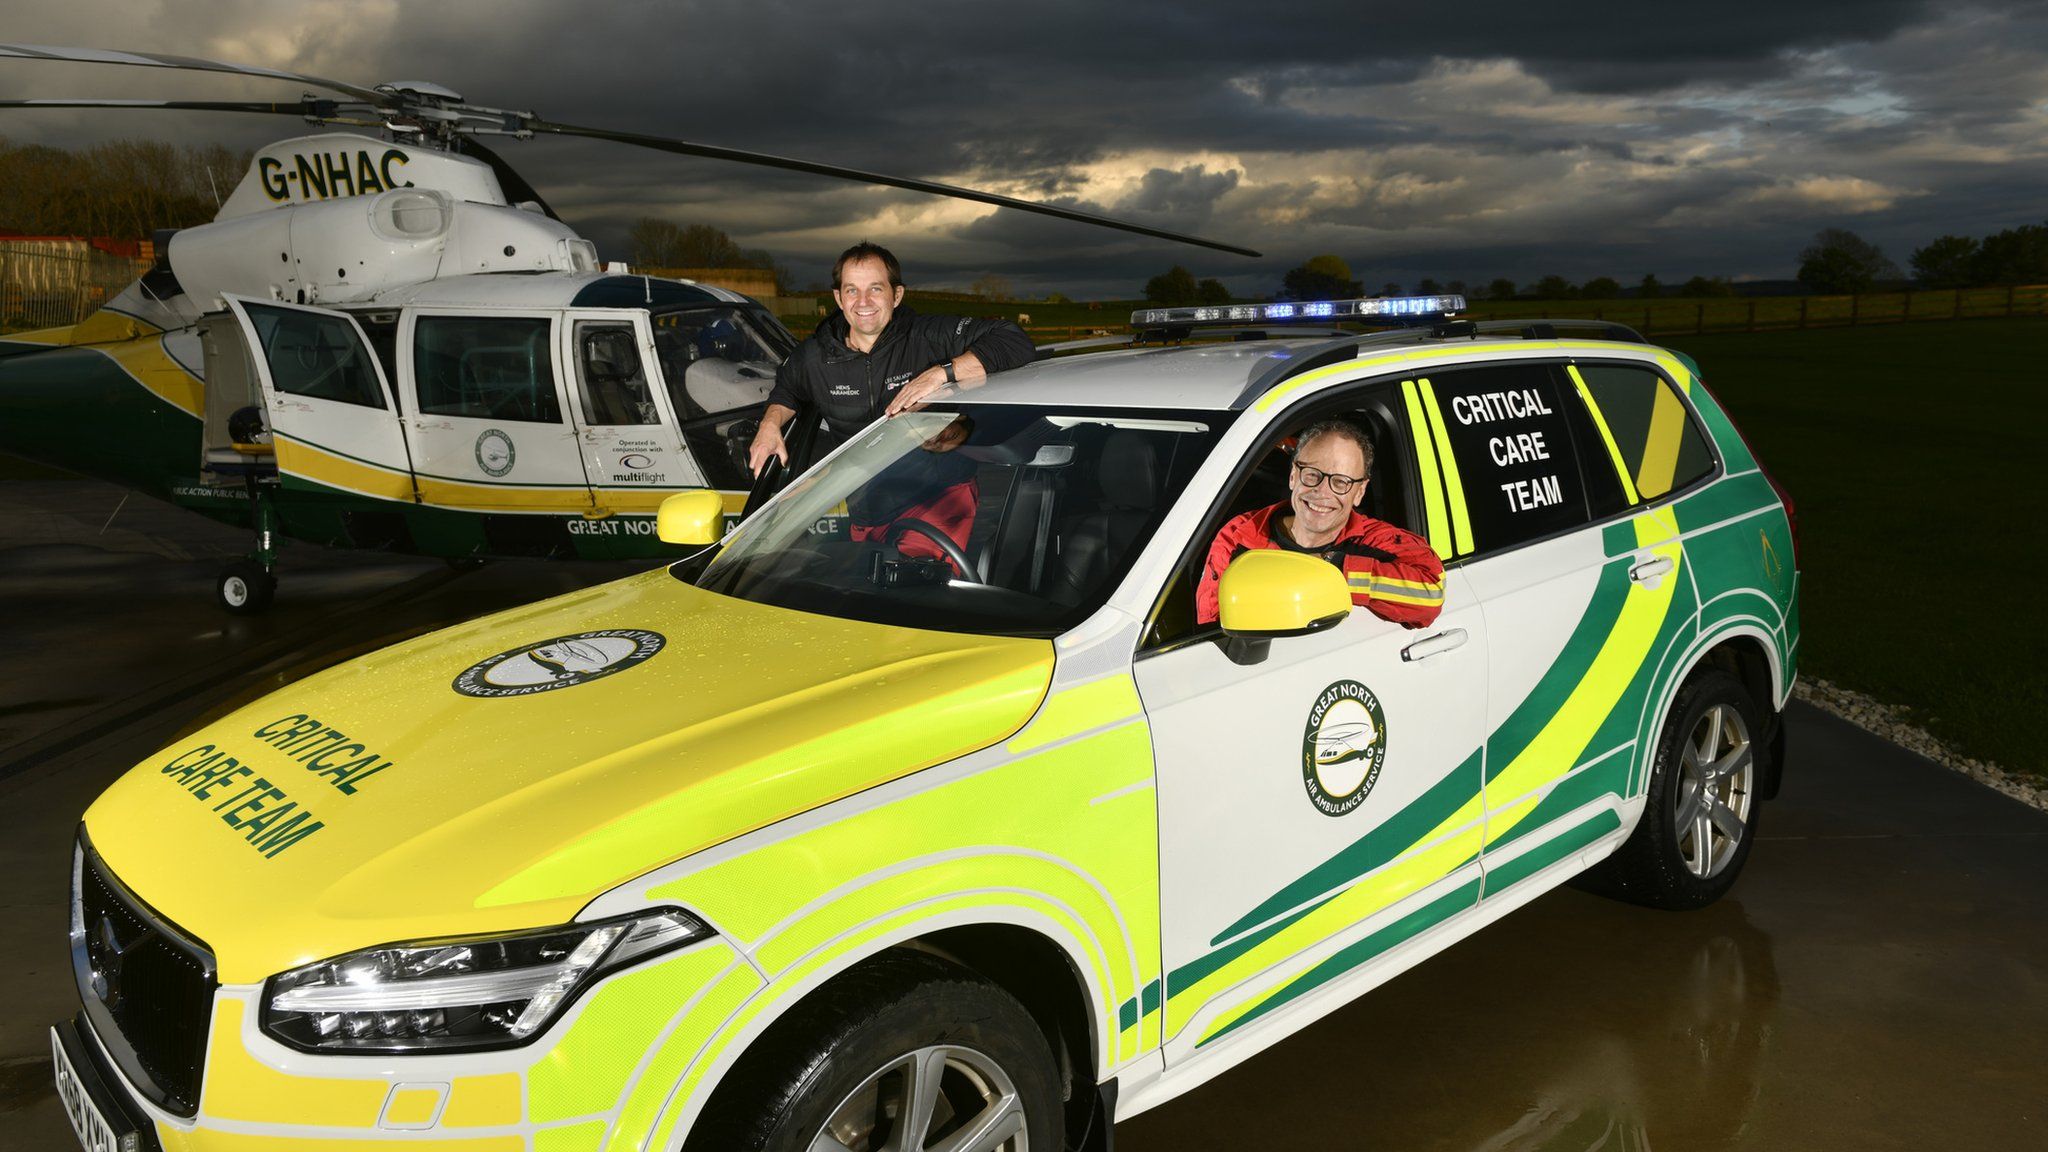 Air ambulance with volunteers